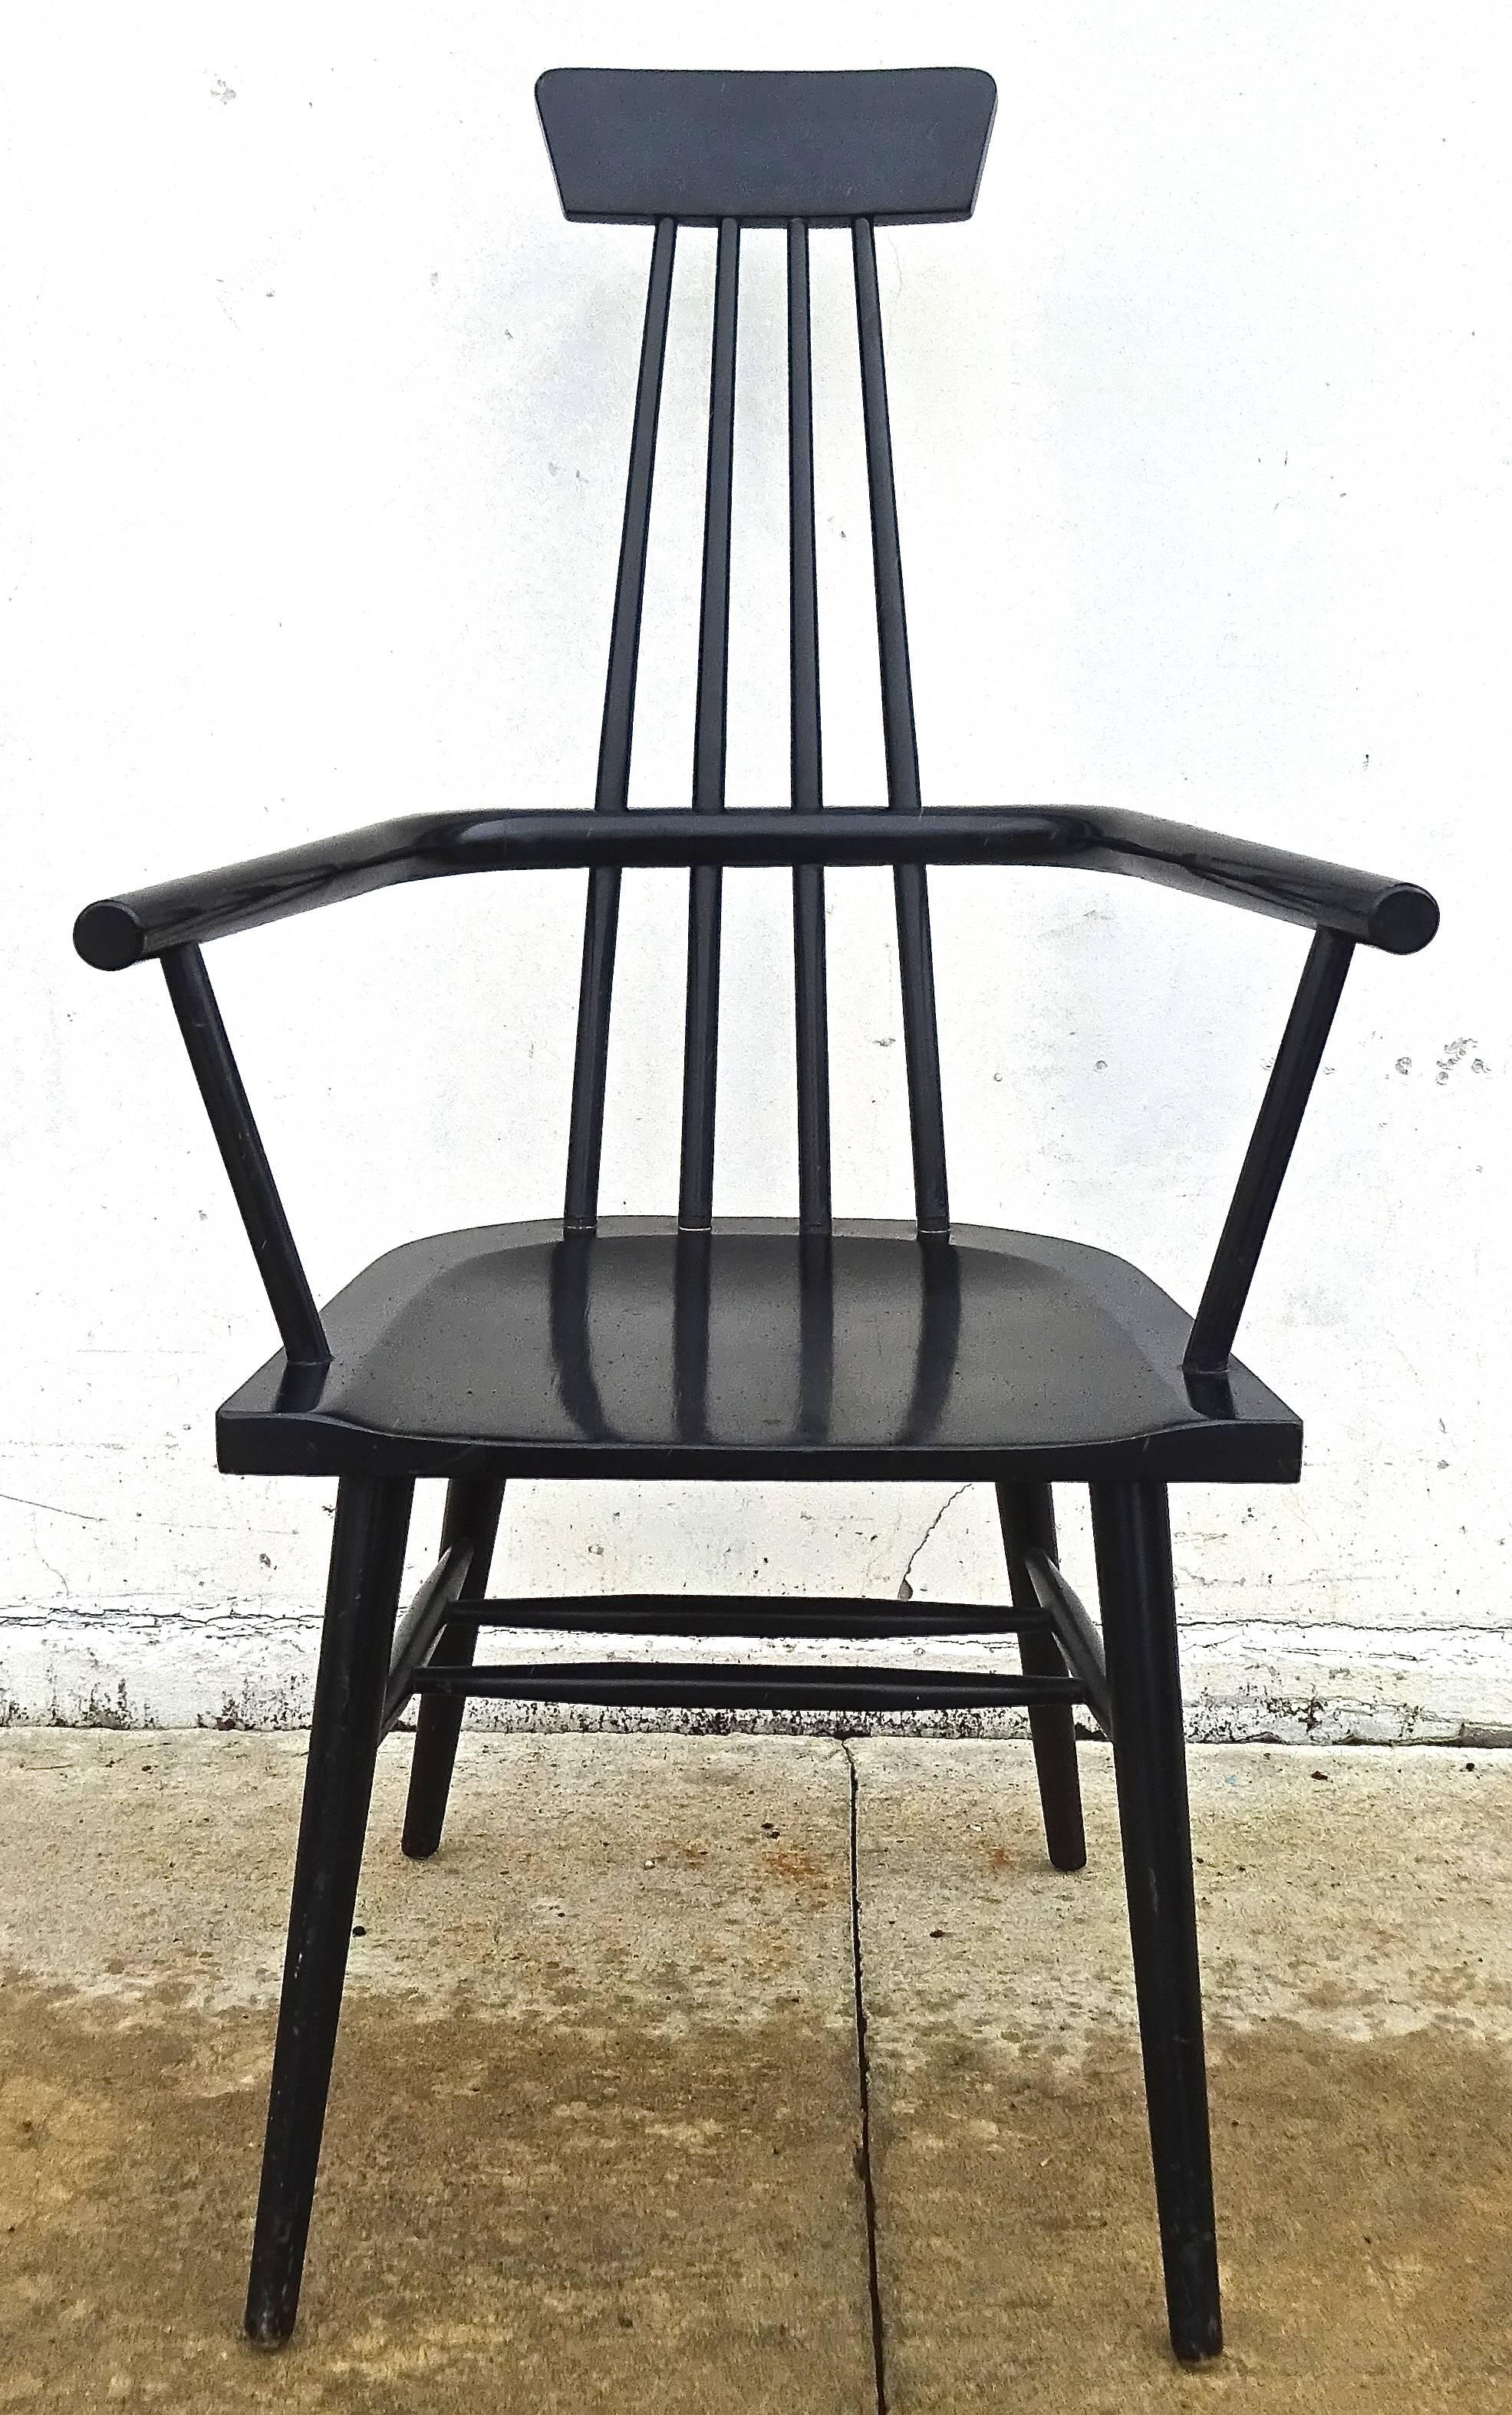 Great modernist windsor chair designed in the 1950s by Paul McCobb with black lacquered finish. Exaggerated tall scale, and extremely comfortable, this chair would make an excellent desk chair, or an occasional pull-up chair.